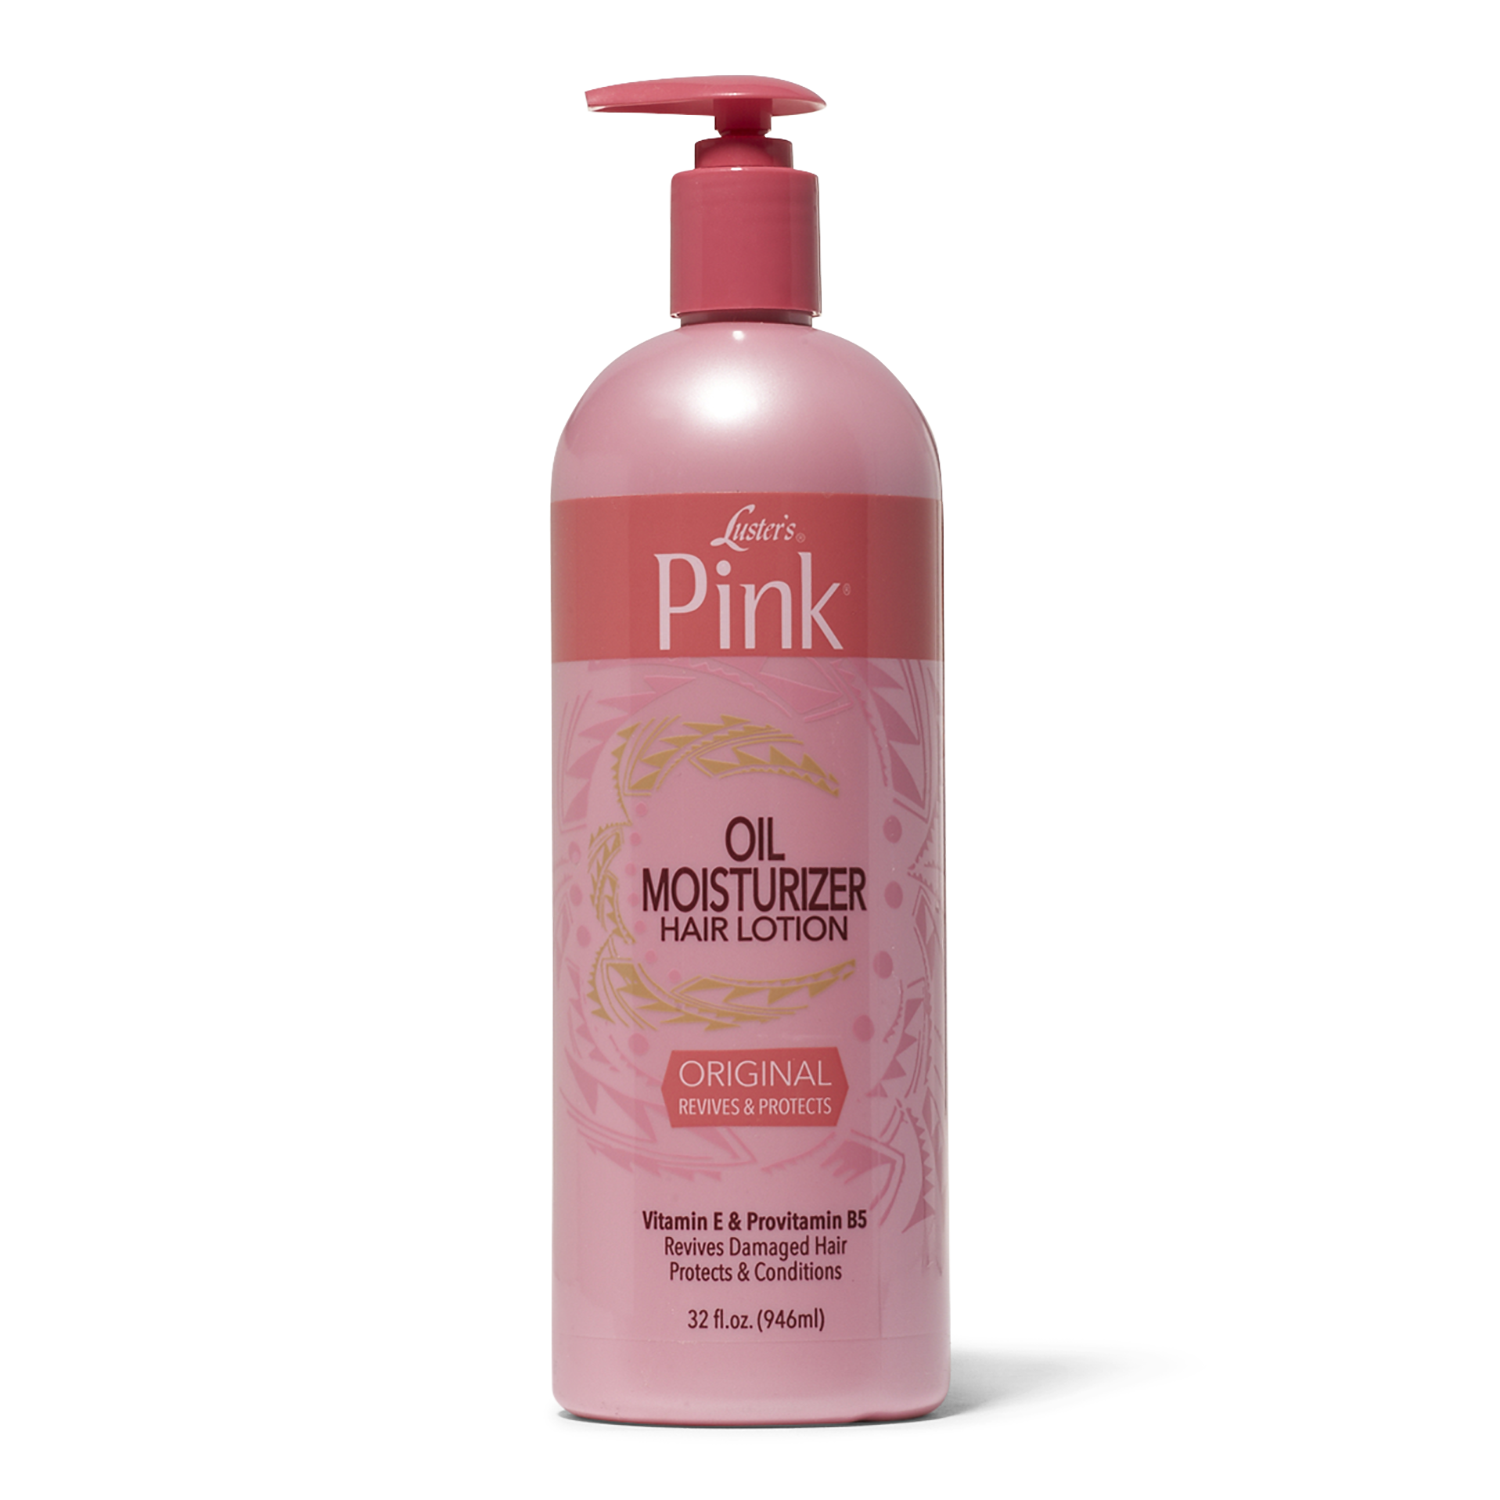 32 oz Pink Oil Moisturizer Hair Lotion at Sally Beauty